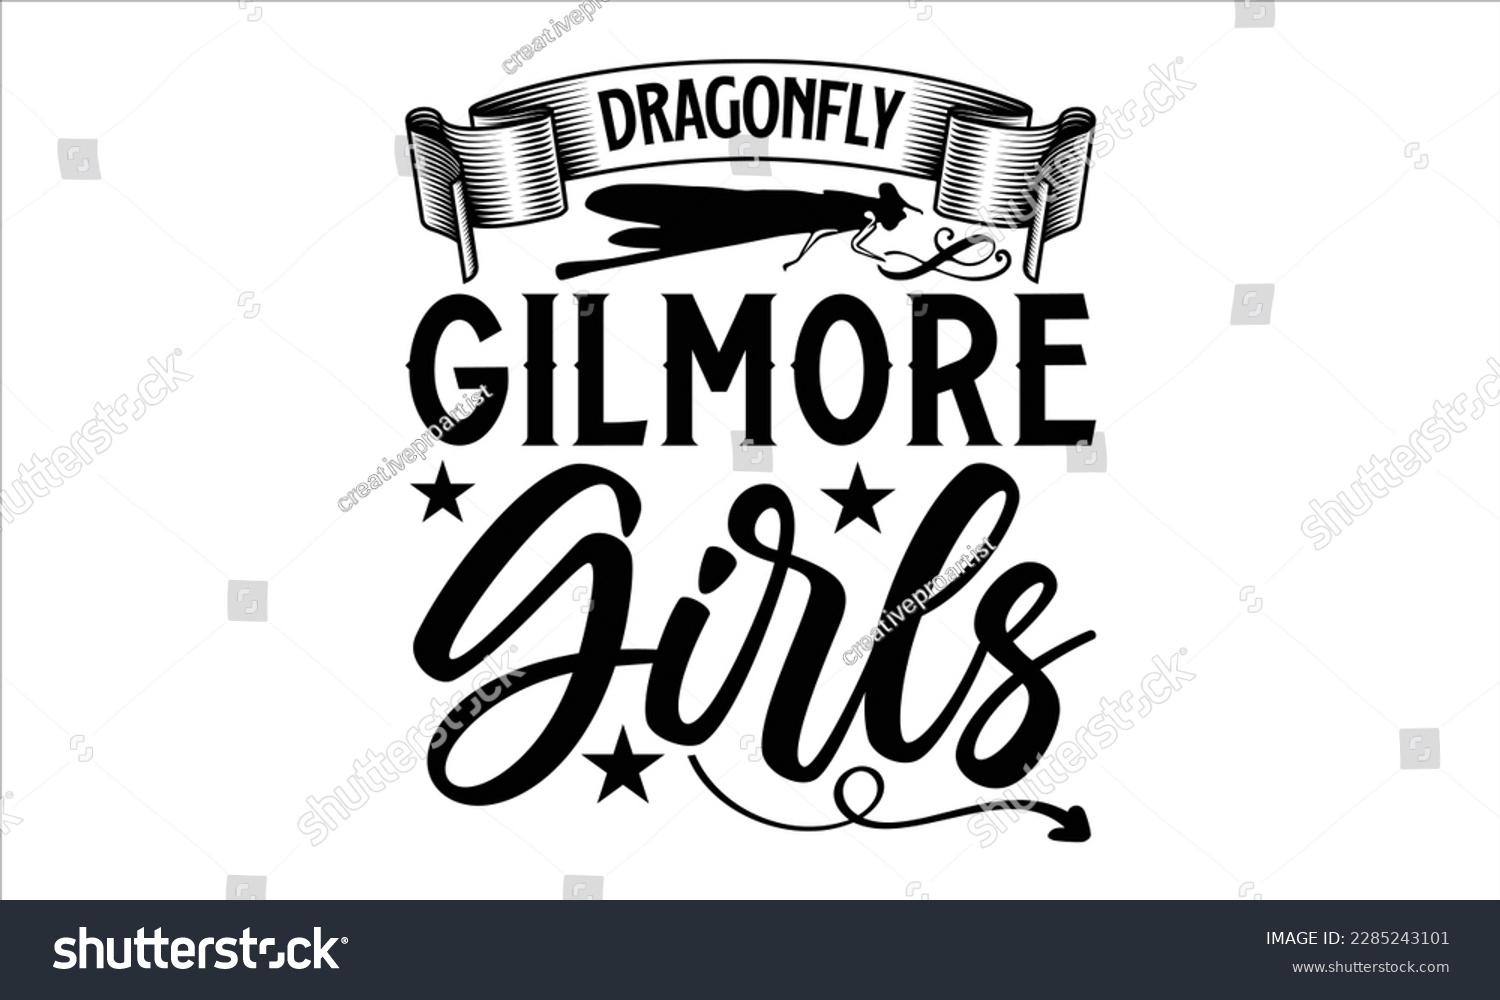 SVG of Dragonfly Gilmore girls- Dragonfly T shirt Design, Hand drawn lettering phrase, Cut Files for Cricut svg, Isolated on white background, Illustration for prints and bags, posters, cards svg